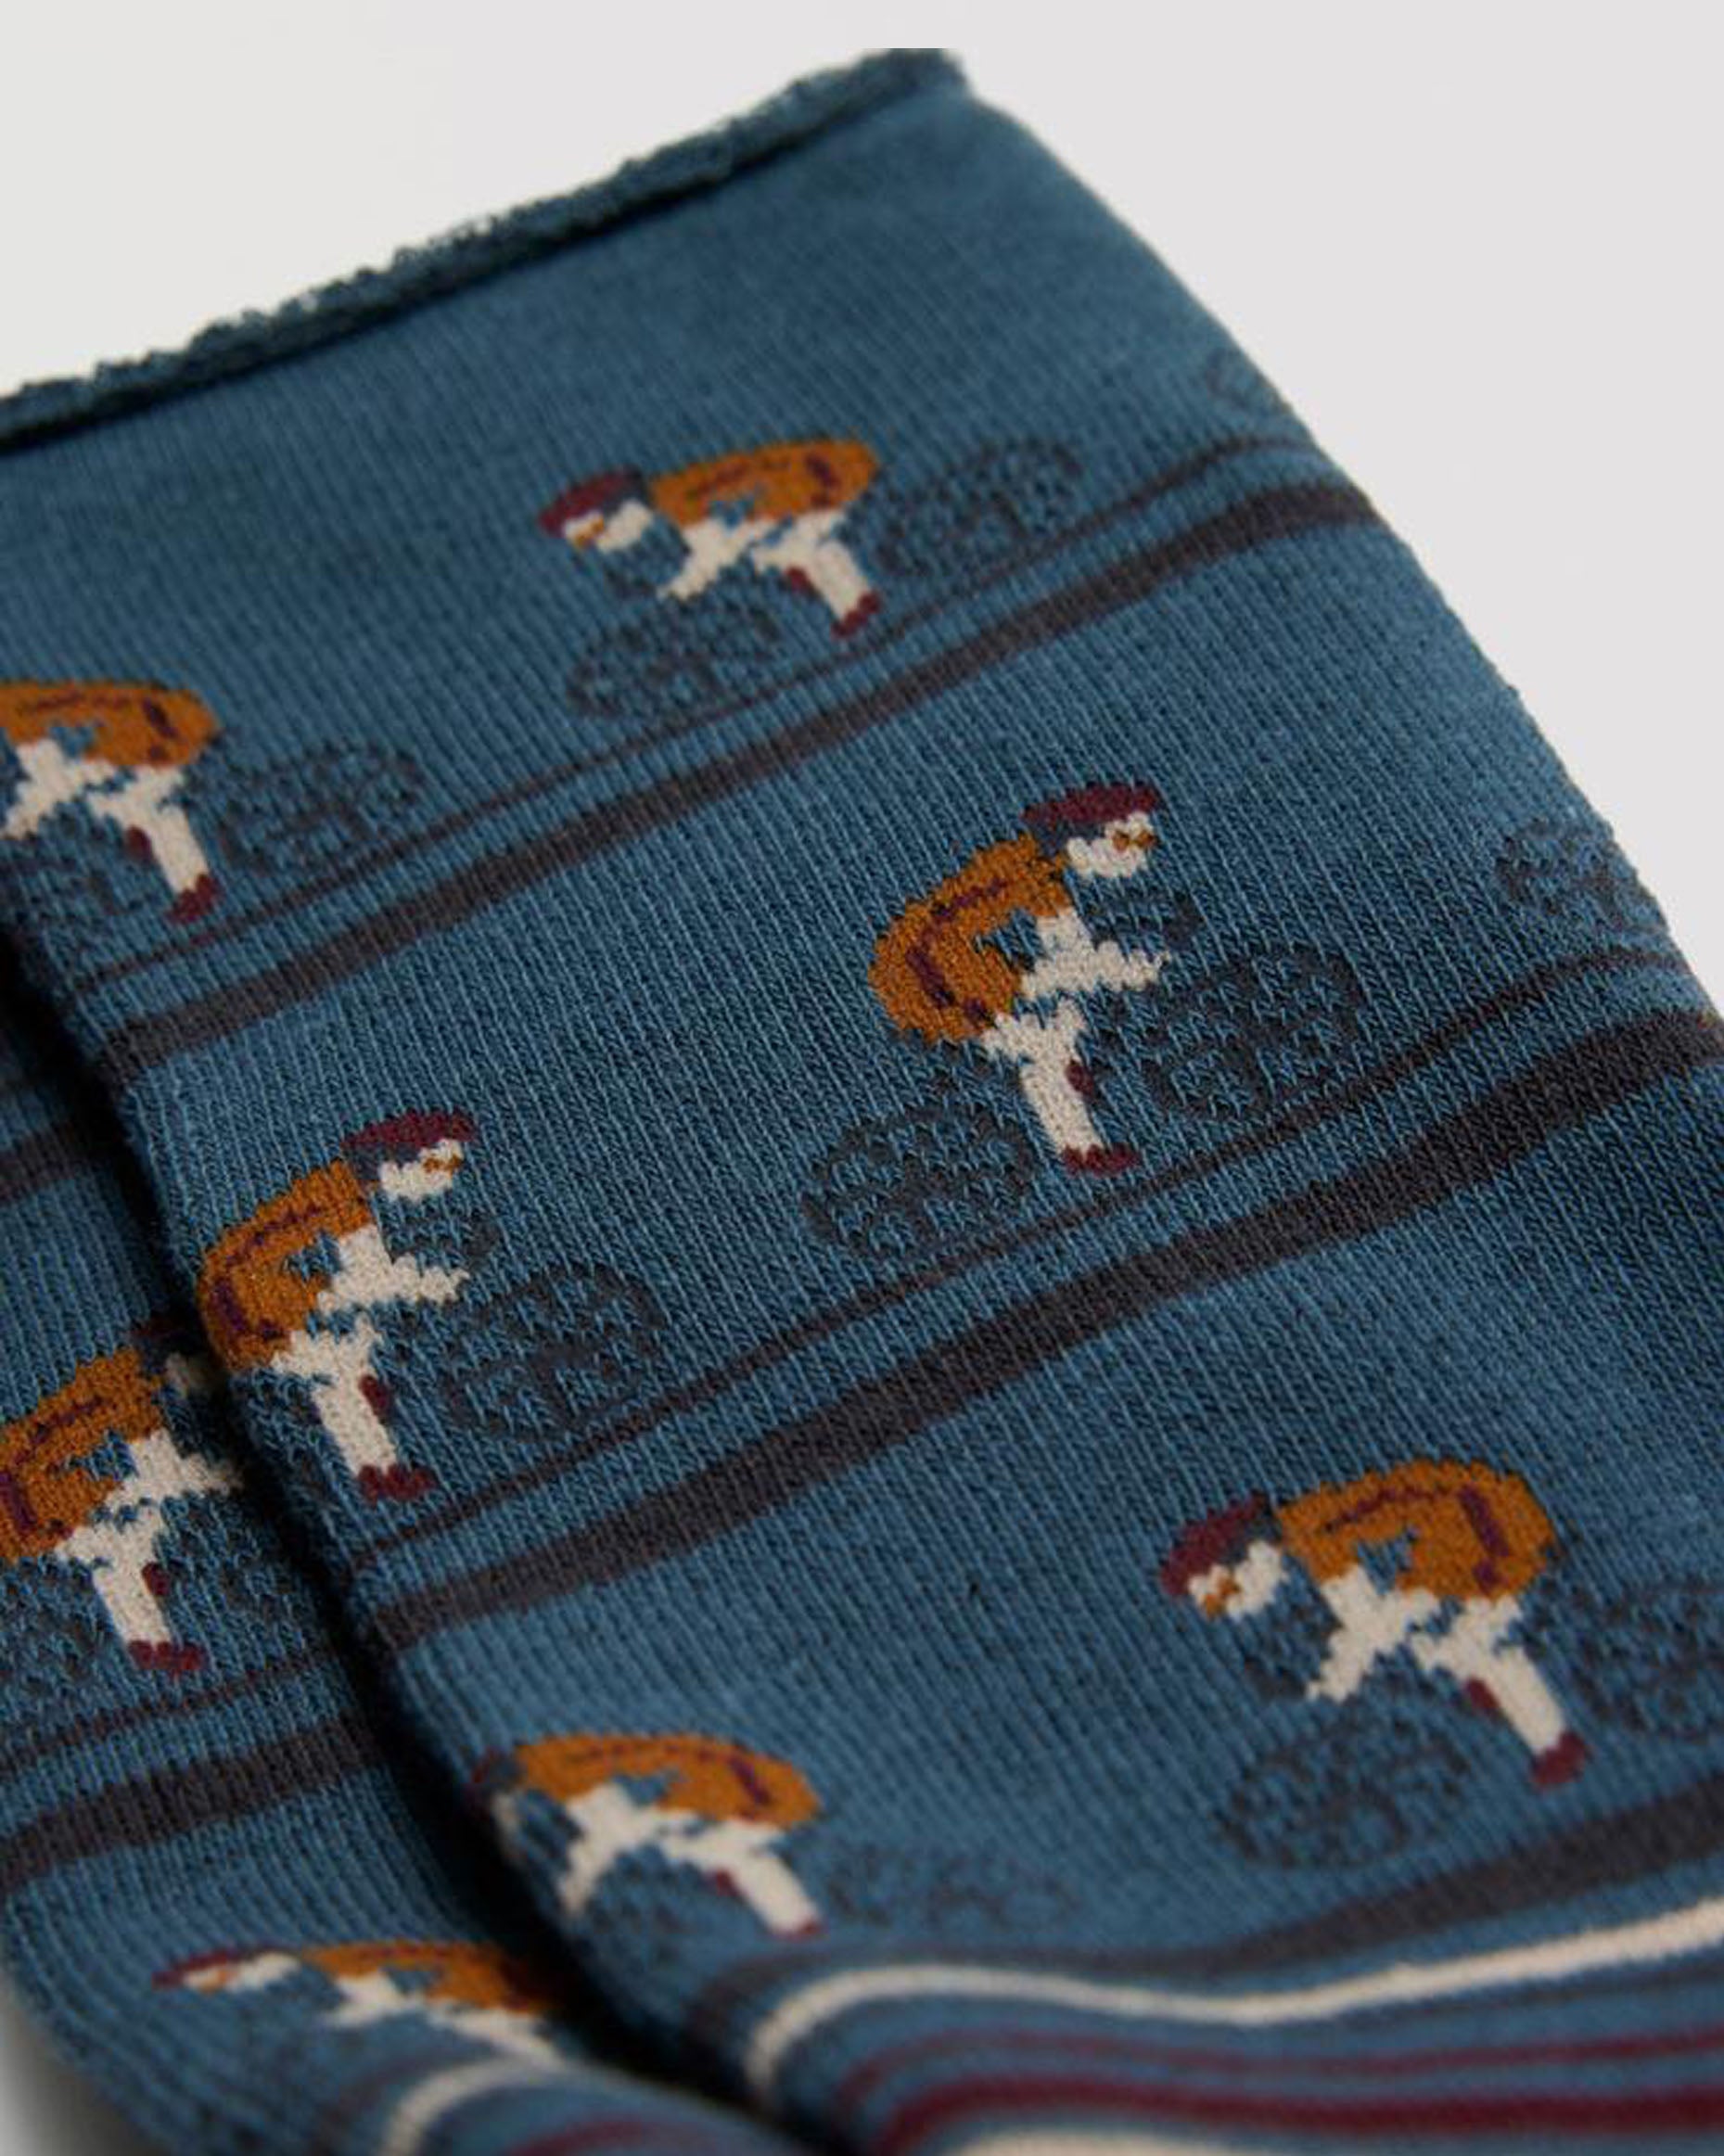 Cyclist Themed Socks - Denim blue cotton mix crew length no cuff ankle socks with a warm terry lining, cyclist riding a bike pattern on the top half.